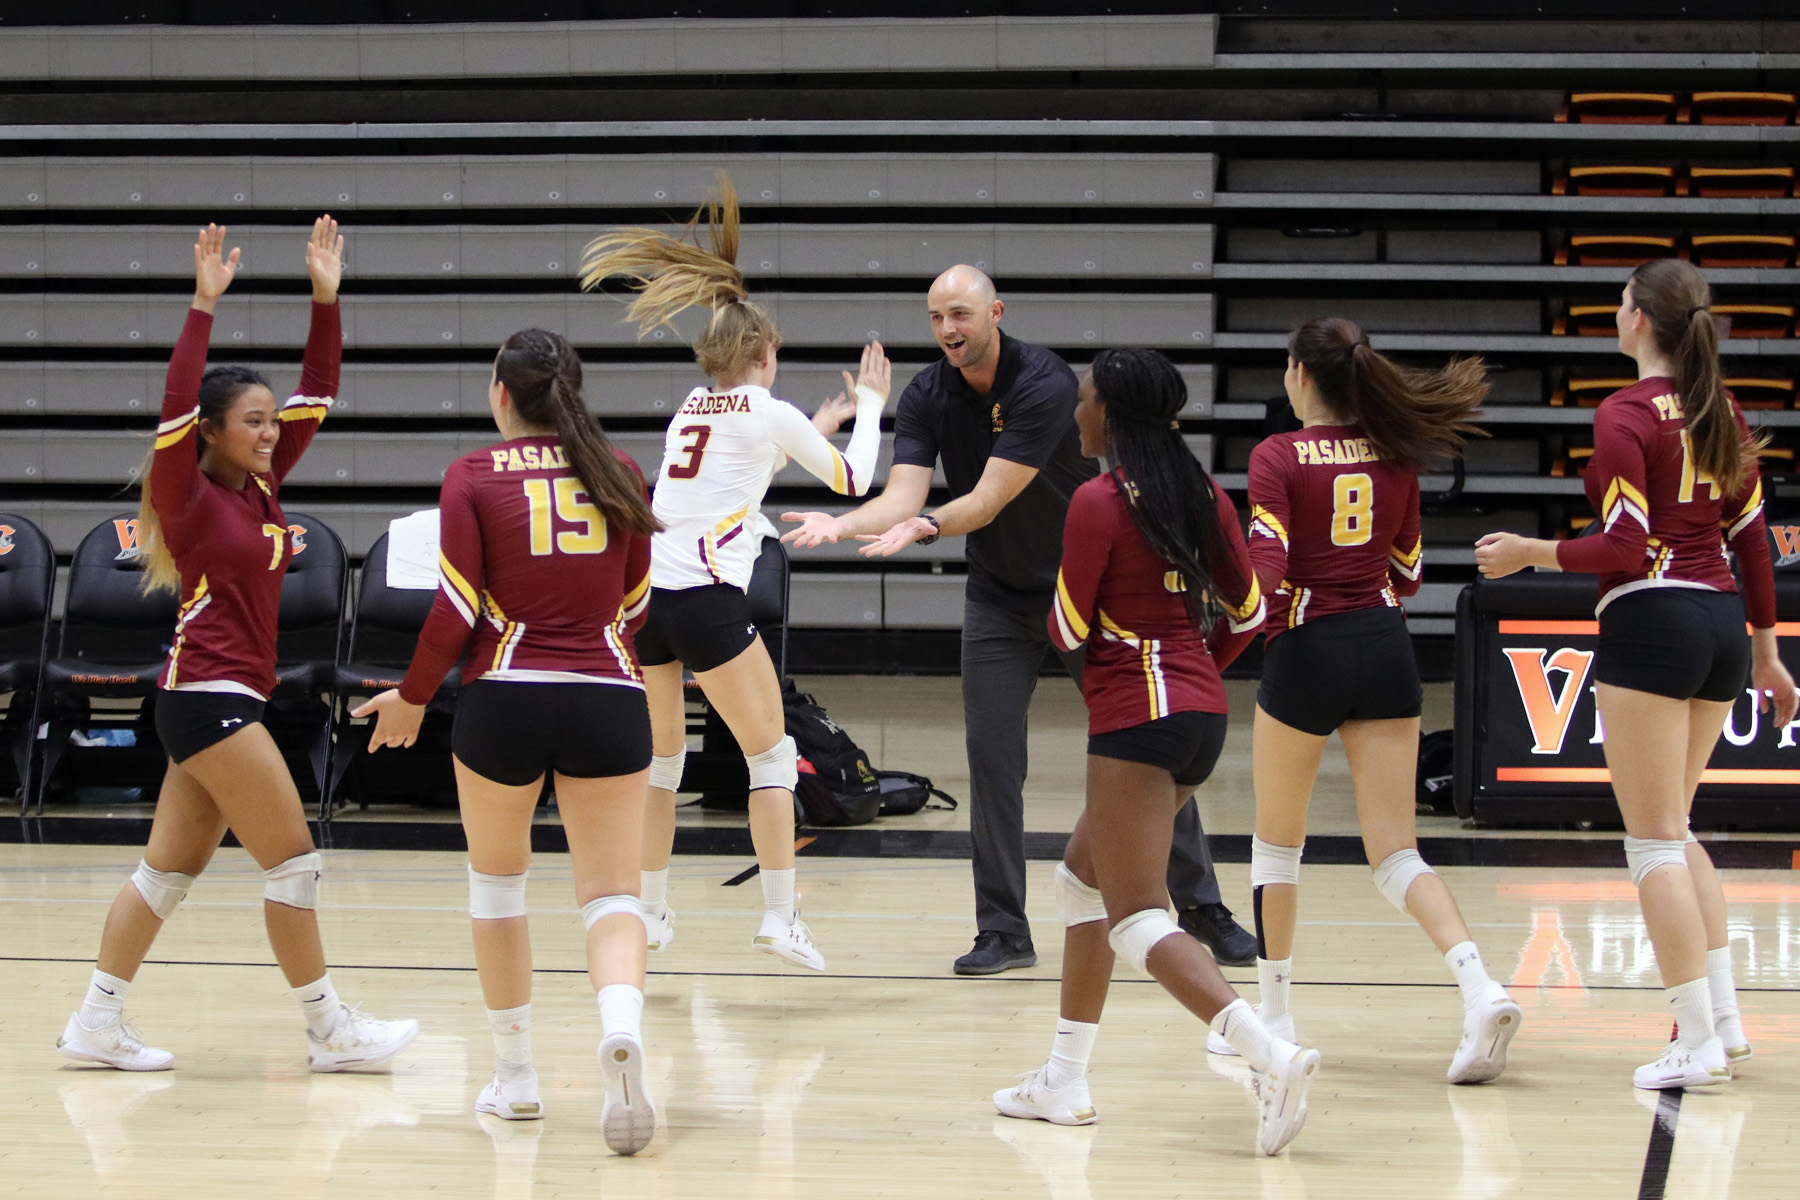 Coach Mike Terrill and his PCC women's volleyball team is excited with being selected No. 9 in this week's State Top 25 Rankings. (photo courtesy of Richard Quinton).